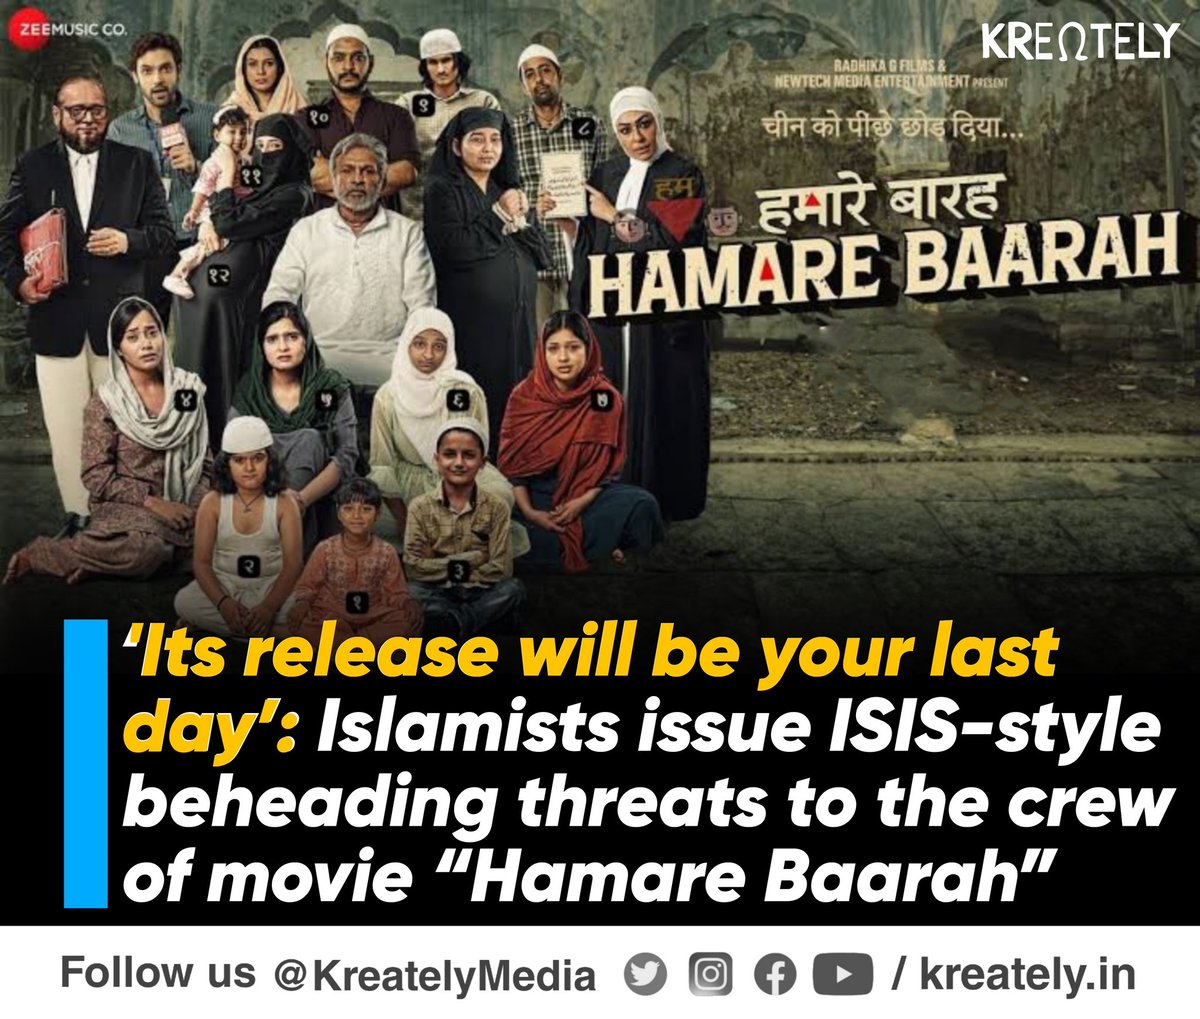 See one movie titled #HamareBarah makes them so uncomfortable that they issue a death threat to the crew members of the film. Where are the champions of freedom of expression?